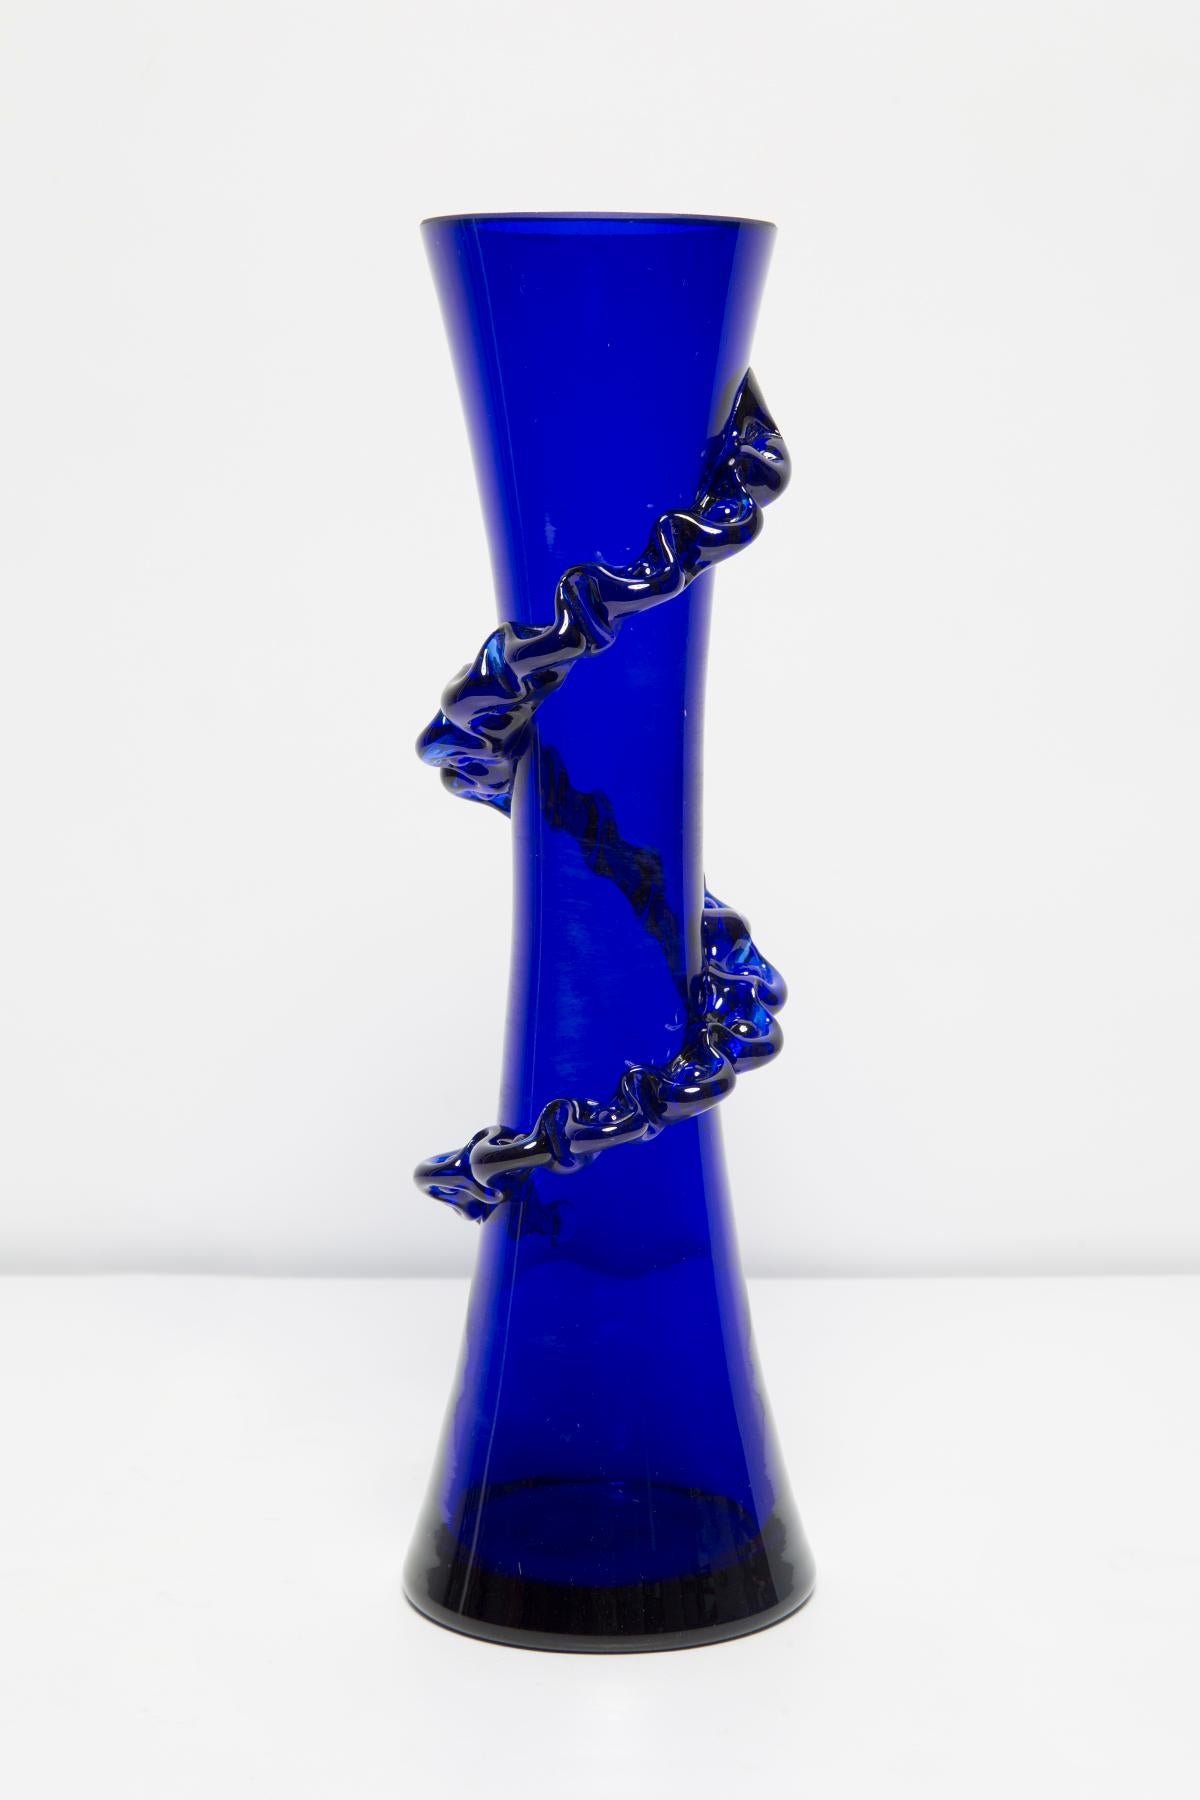 20th Century Medium Mid Century Blue Vase with Frill, Europe, 1960s For Sale